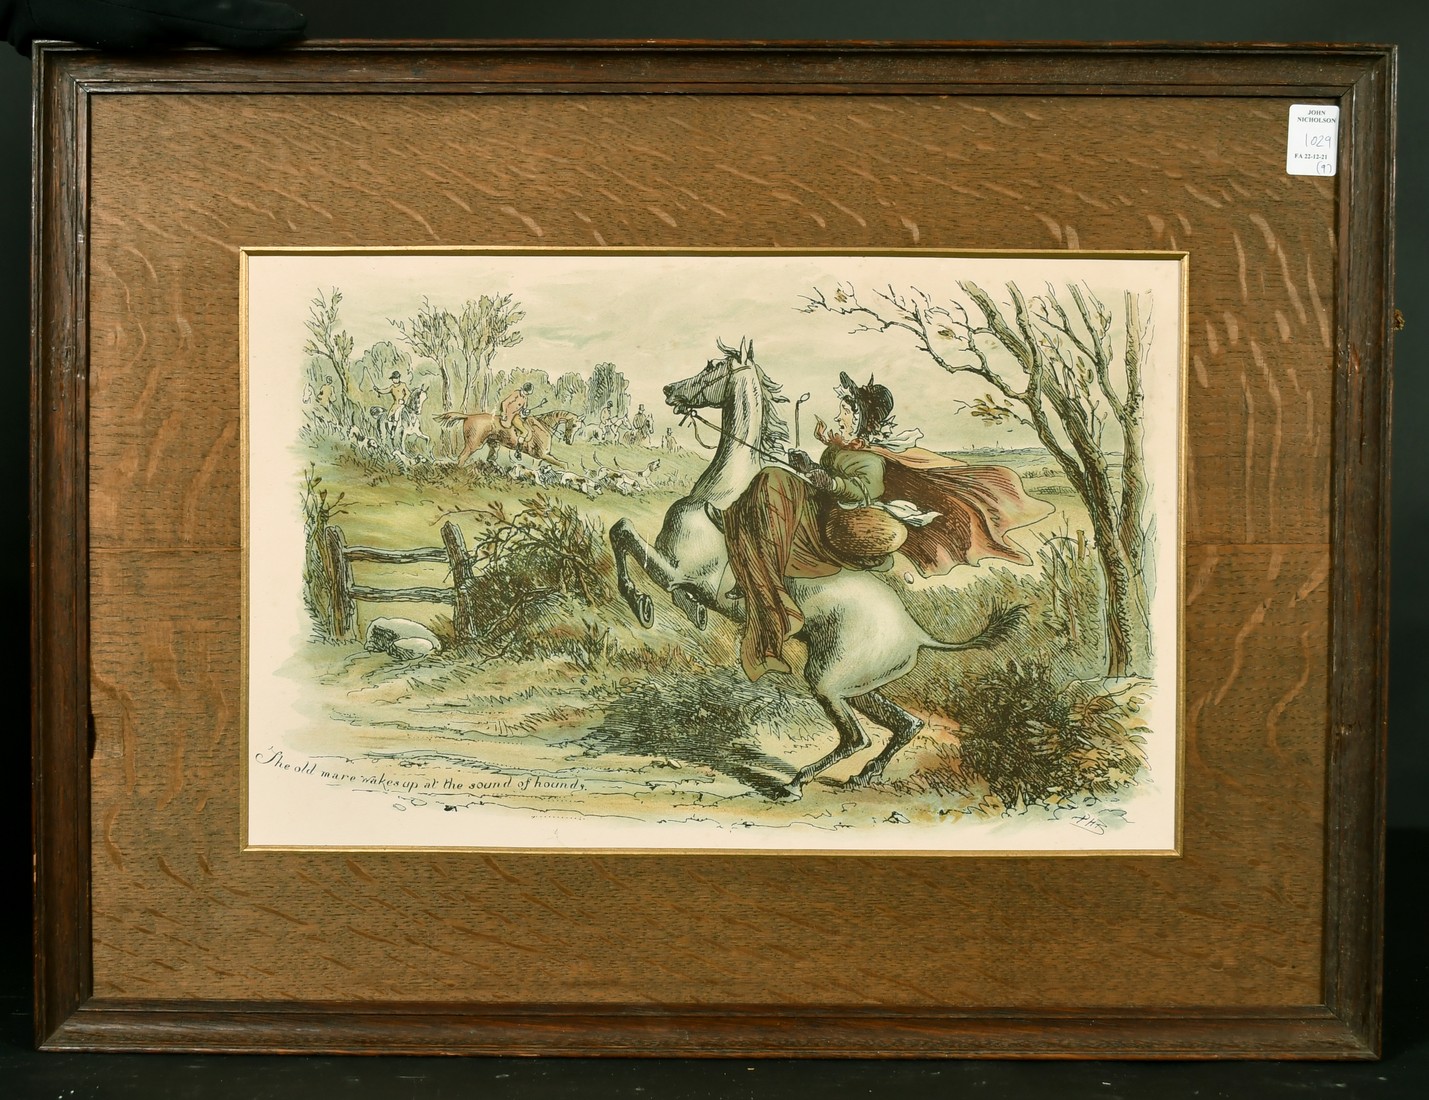 Hablot Knight Browne (1815-1882) 'Phiz', Dame Perkins and her Grey Mare, a set of 8 coloured prints, - Image 2 of 10